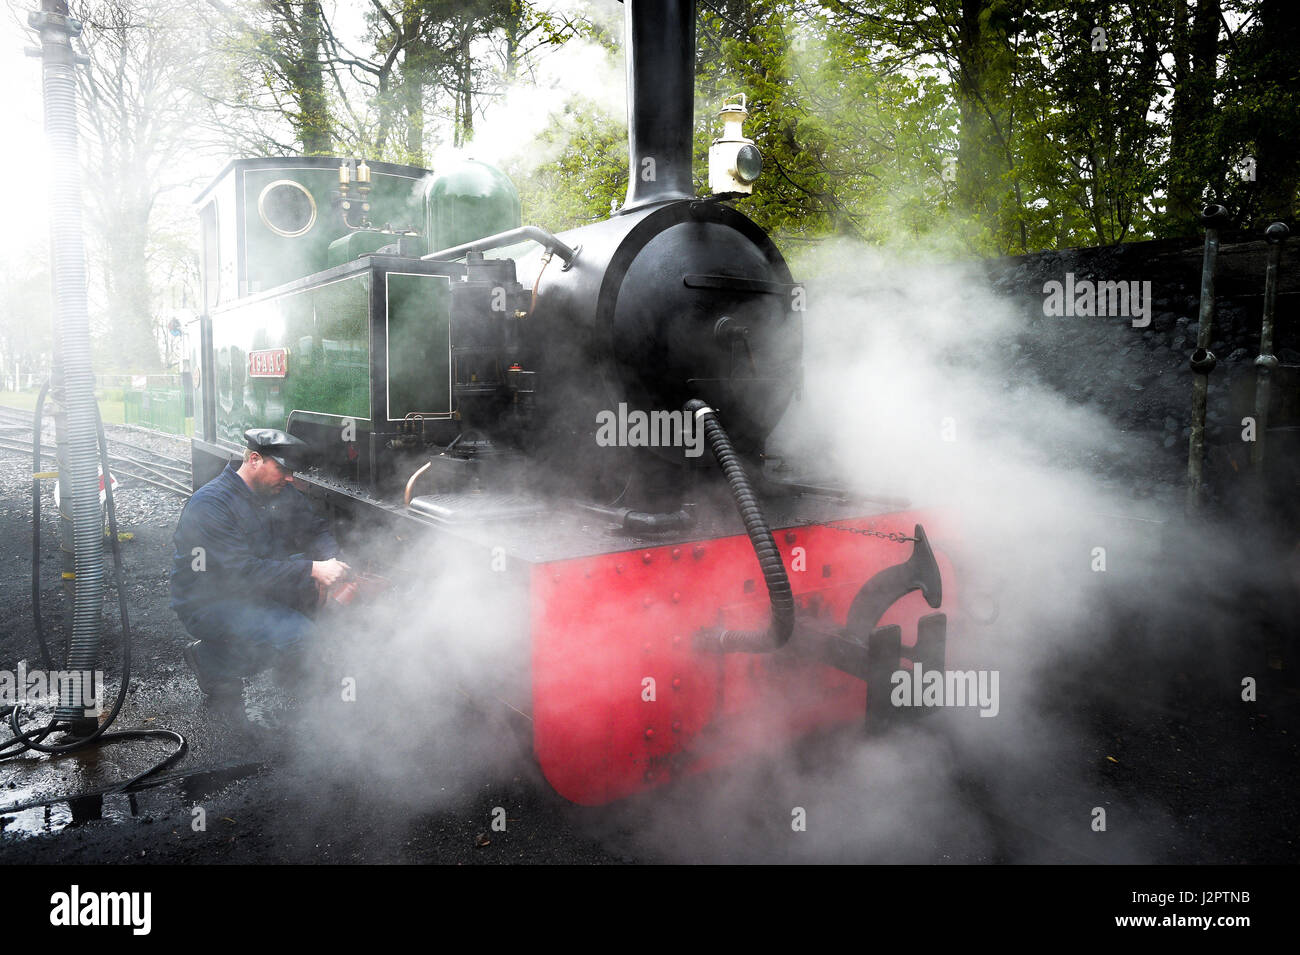 Driver Chris Carder oils the motion on Isaac, a 1952 narrow gauge steam locomotive, in between runs from Woody Bay station on the reopened railway section between Lynton and Barnstaple, Devon. Stock Photo